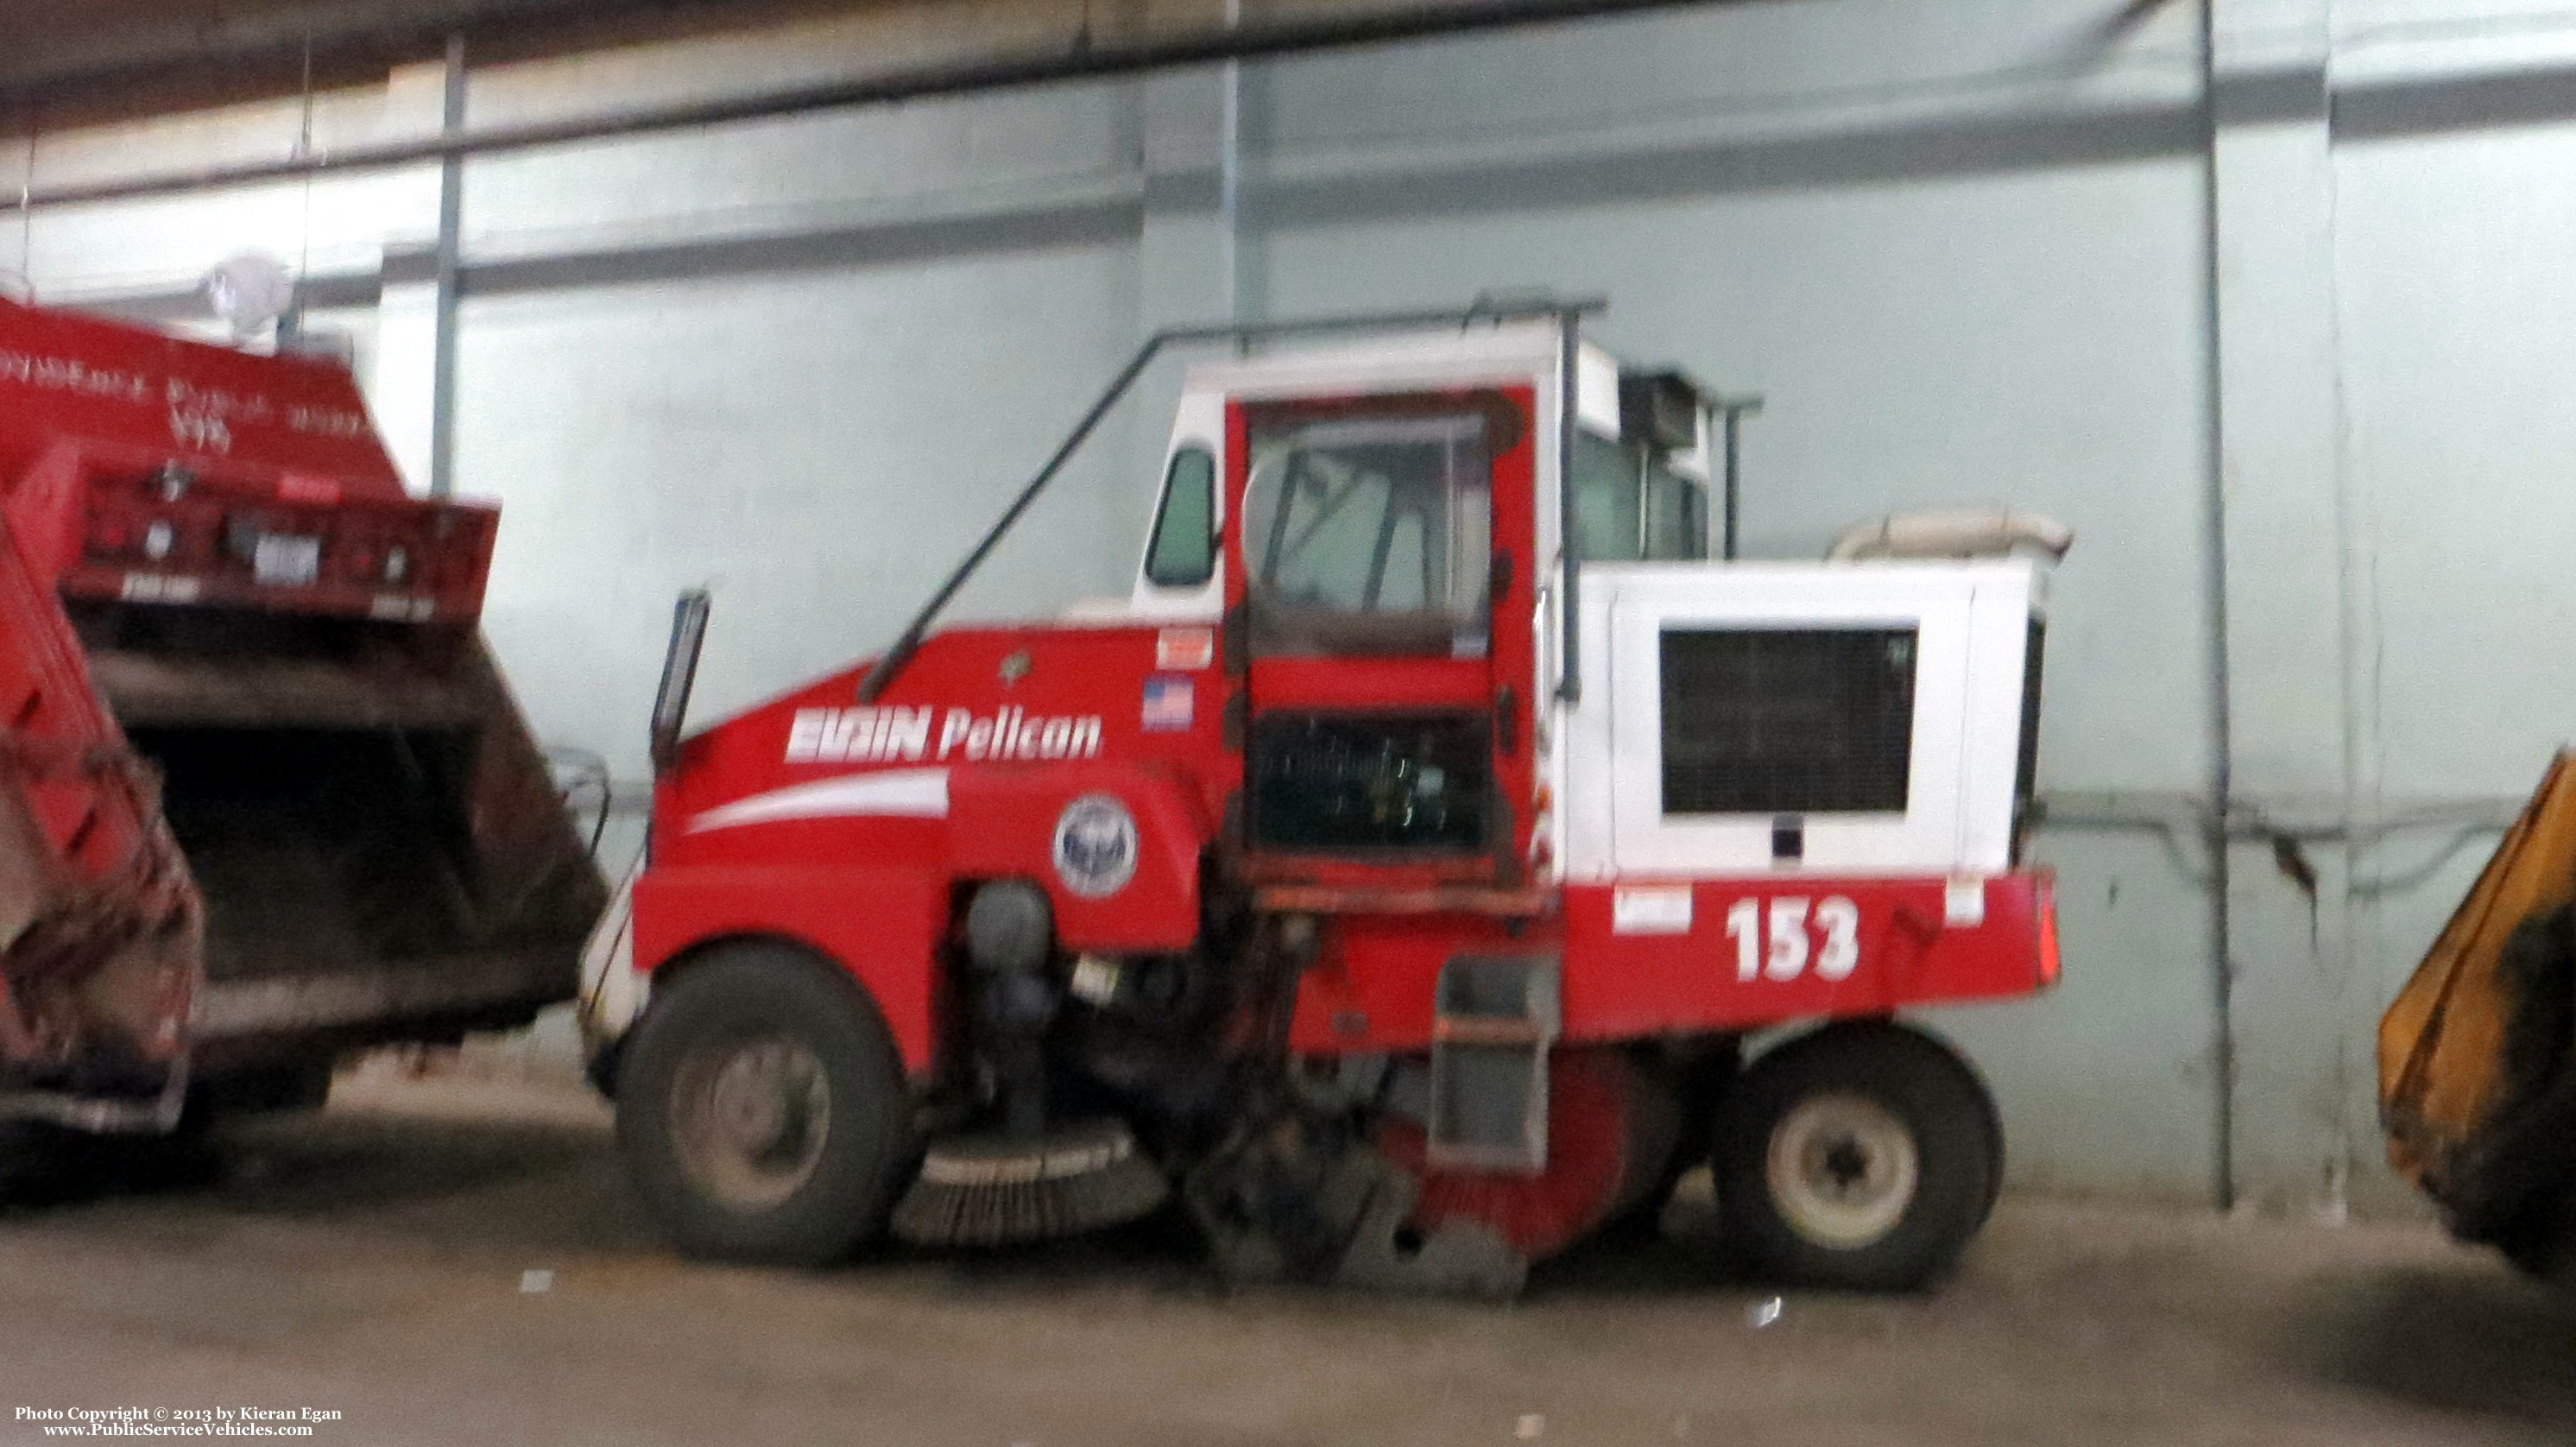 A photo  of Providence Highway Division
            Sweeper 153, a 1990-2007 Elgin Pelican             taken by Kieran Egan